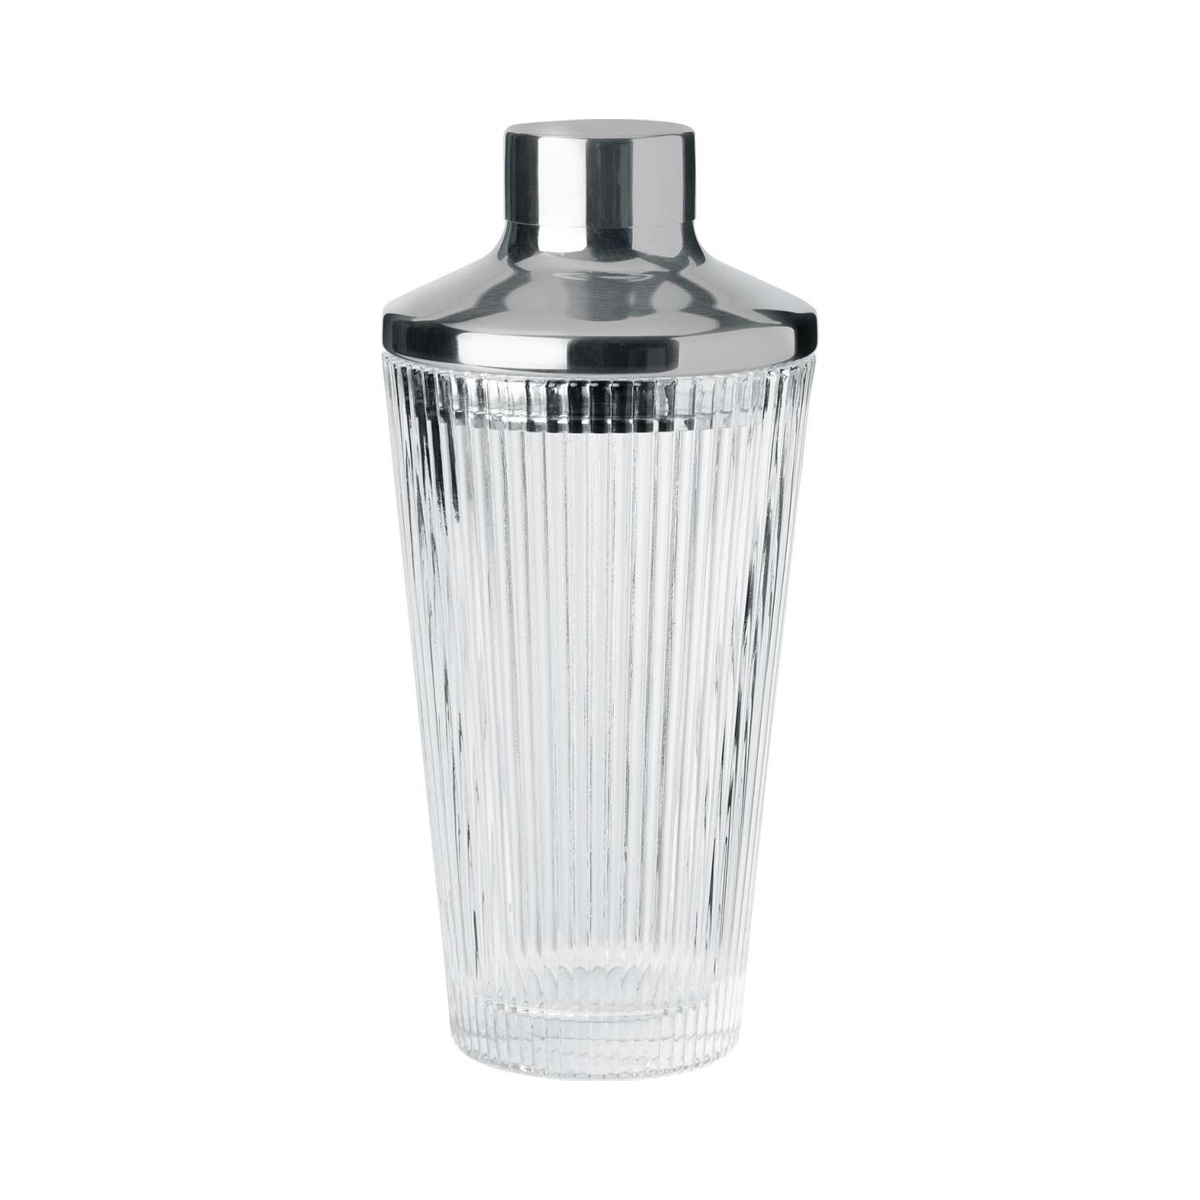 Stelton Pilastro cocktail shaker 0.4 L clear, stainless steel polished